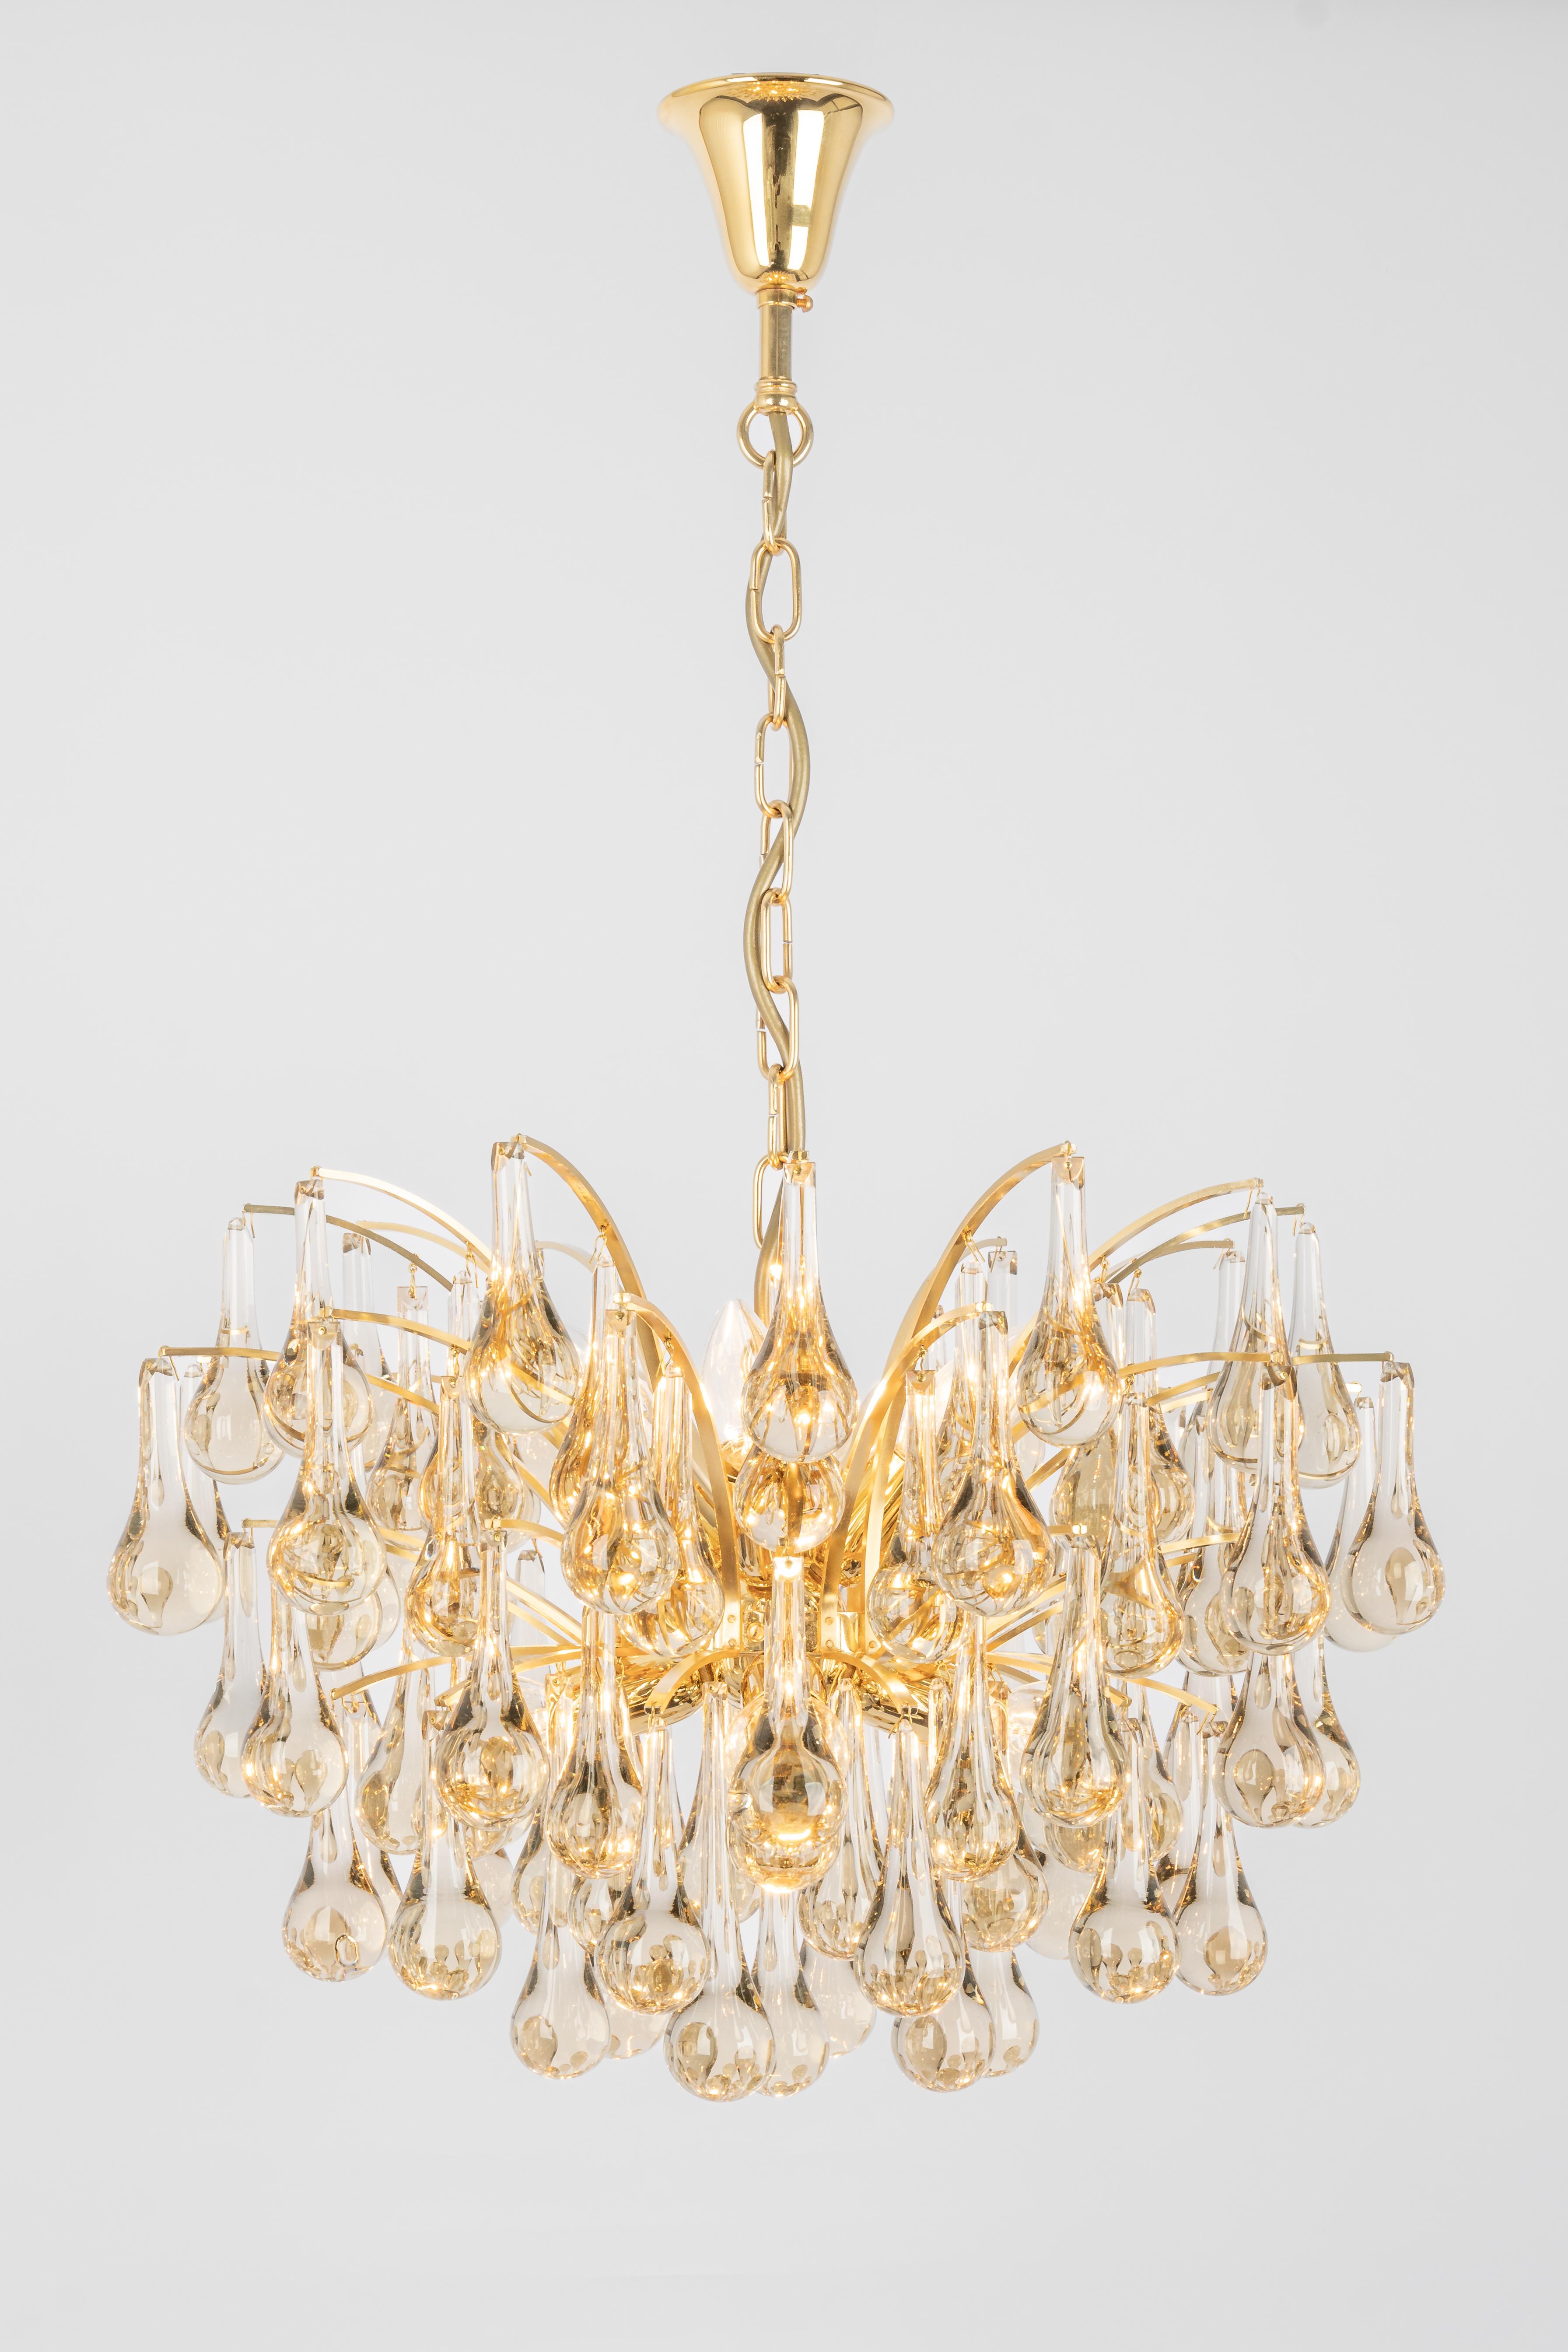 Stunning chandelier by Christoph Palme, Germany, manufactured in the 1970s. It’s composed of Murano teardrop glass pieces on a gilded brass frame.

High quality and in very good condition. Cleaned, well-wired, and ready to use. 

The fixture